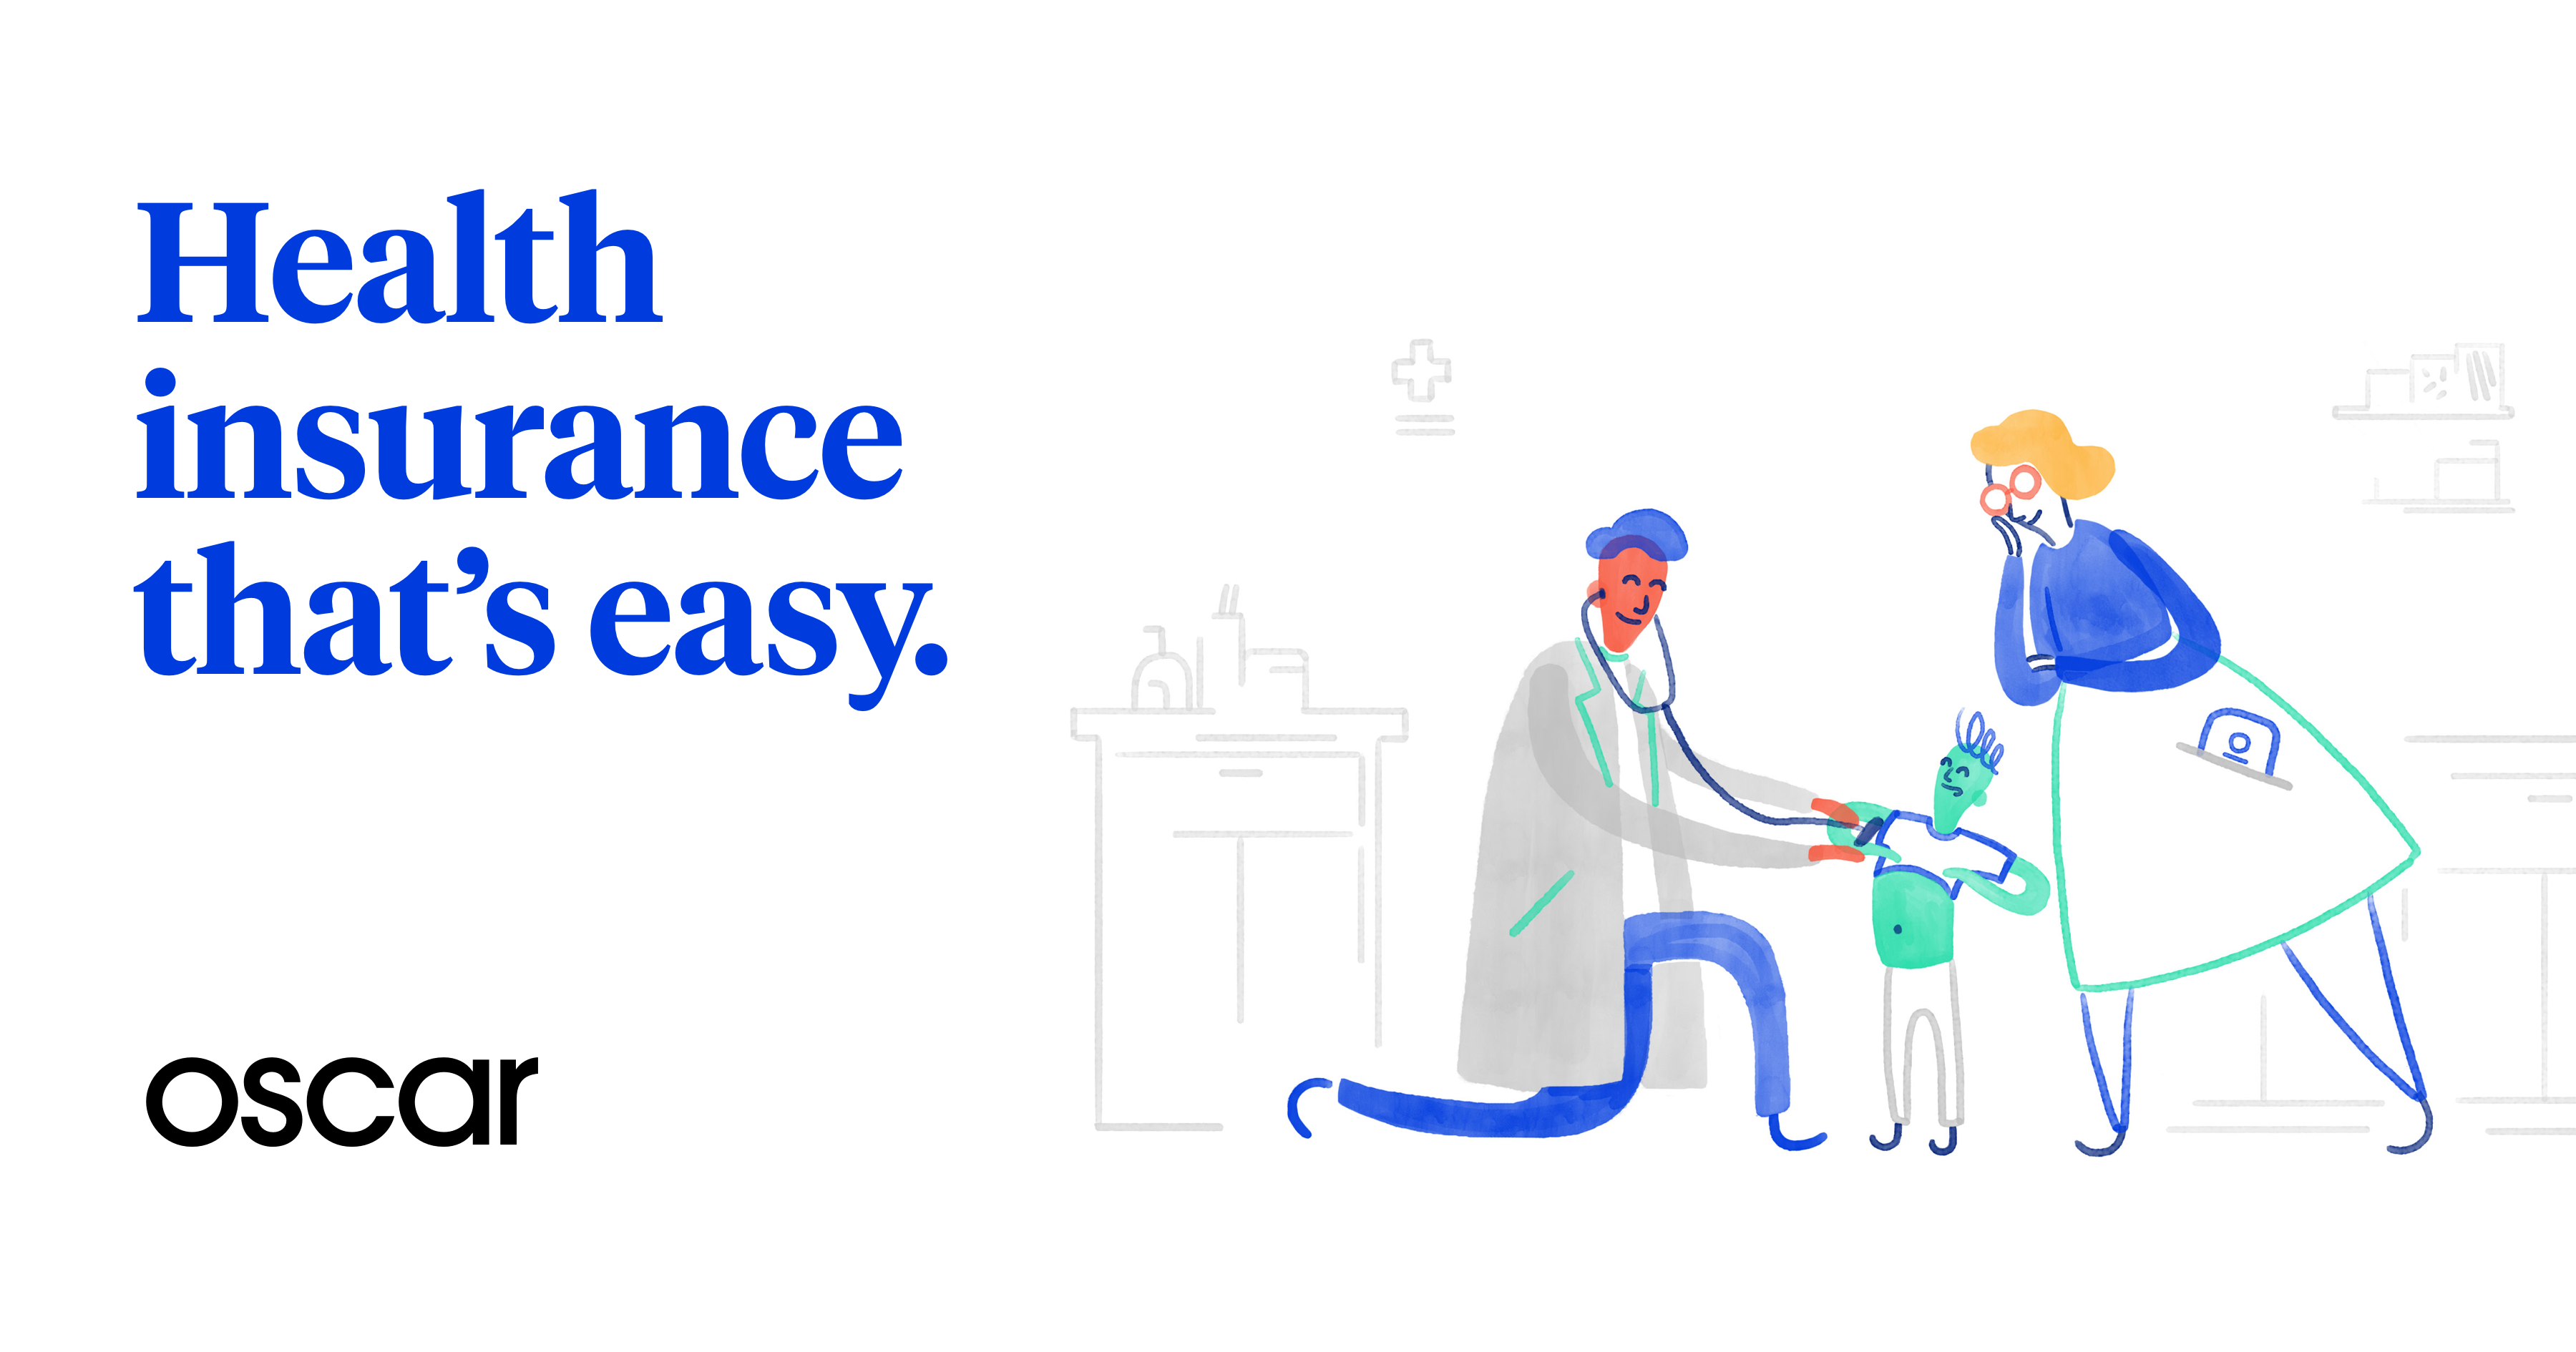 Oscar Health Plans are Now Available for Your Group!